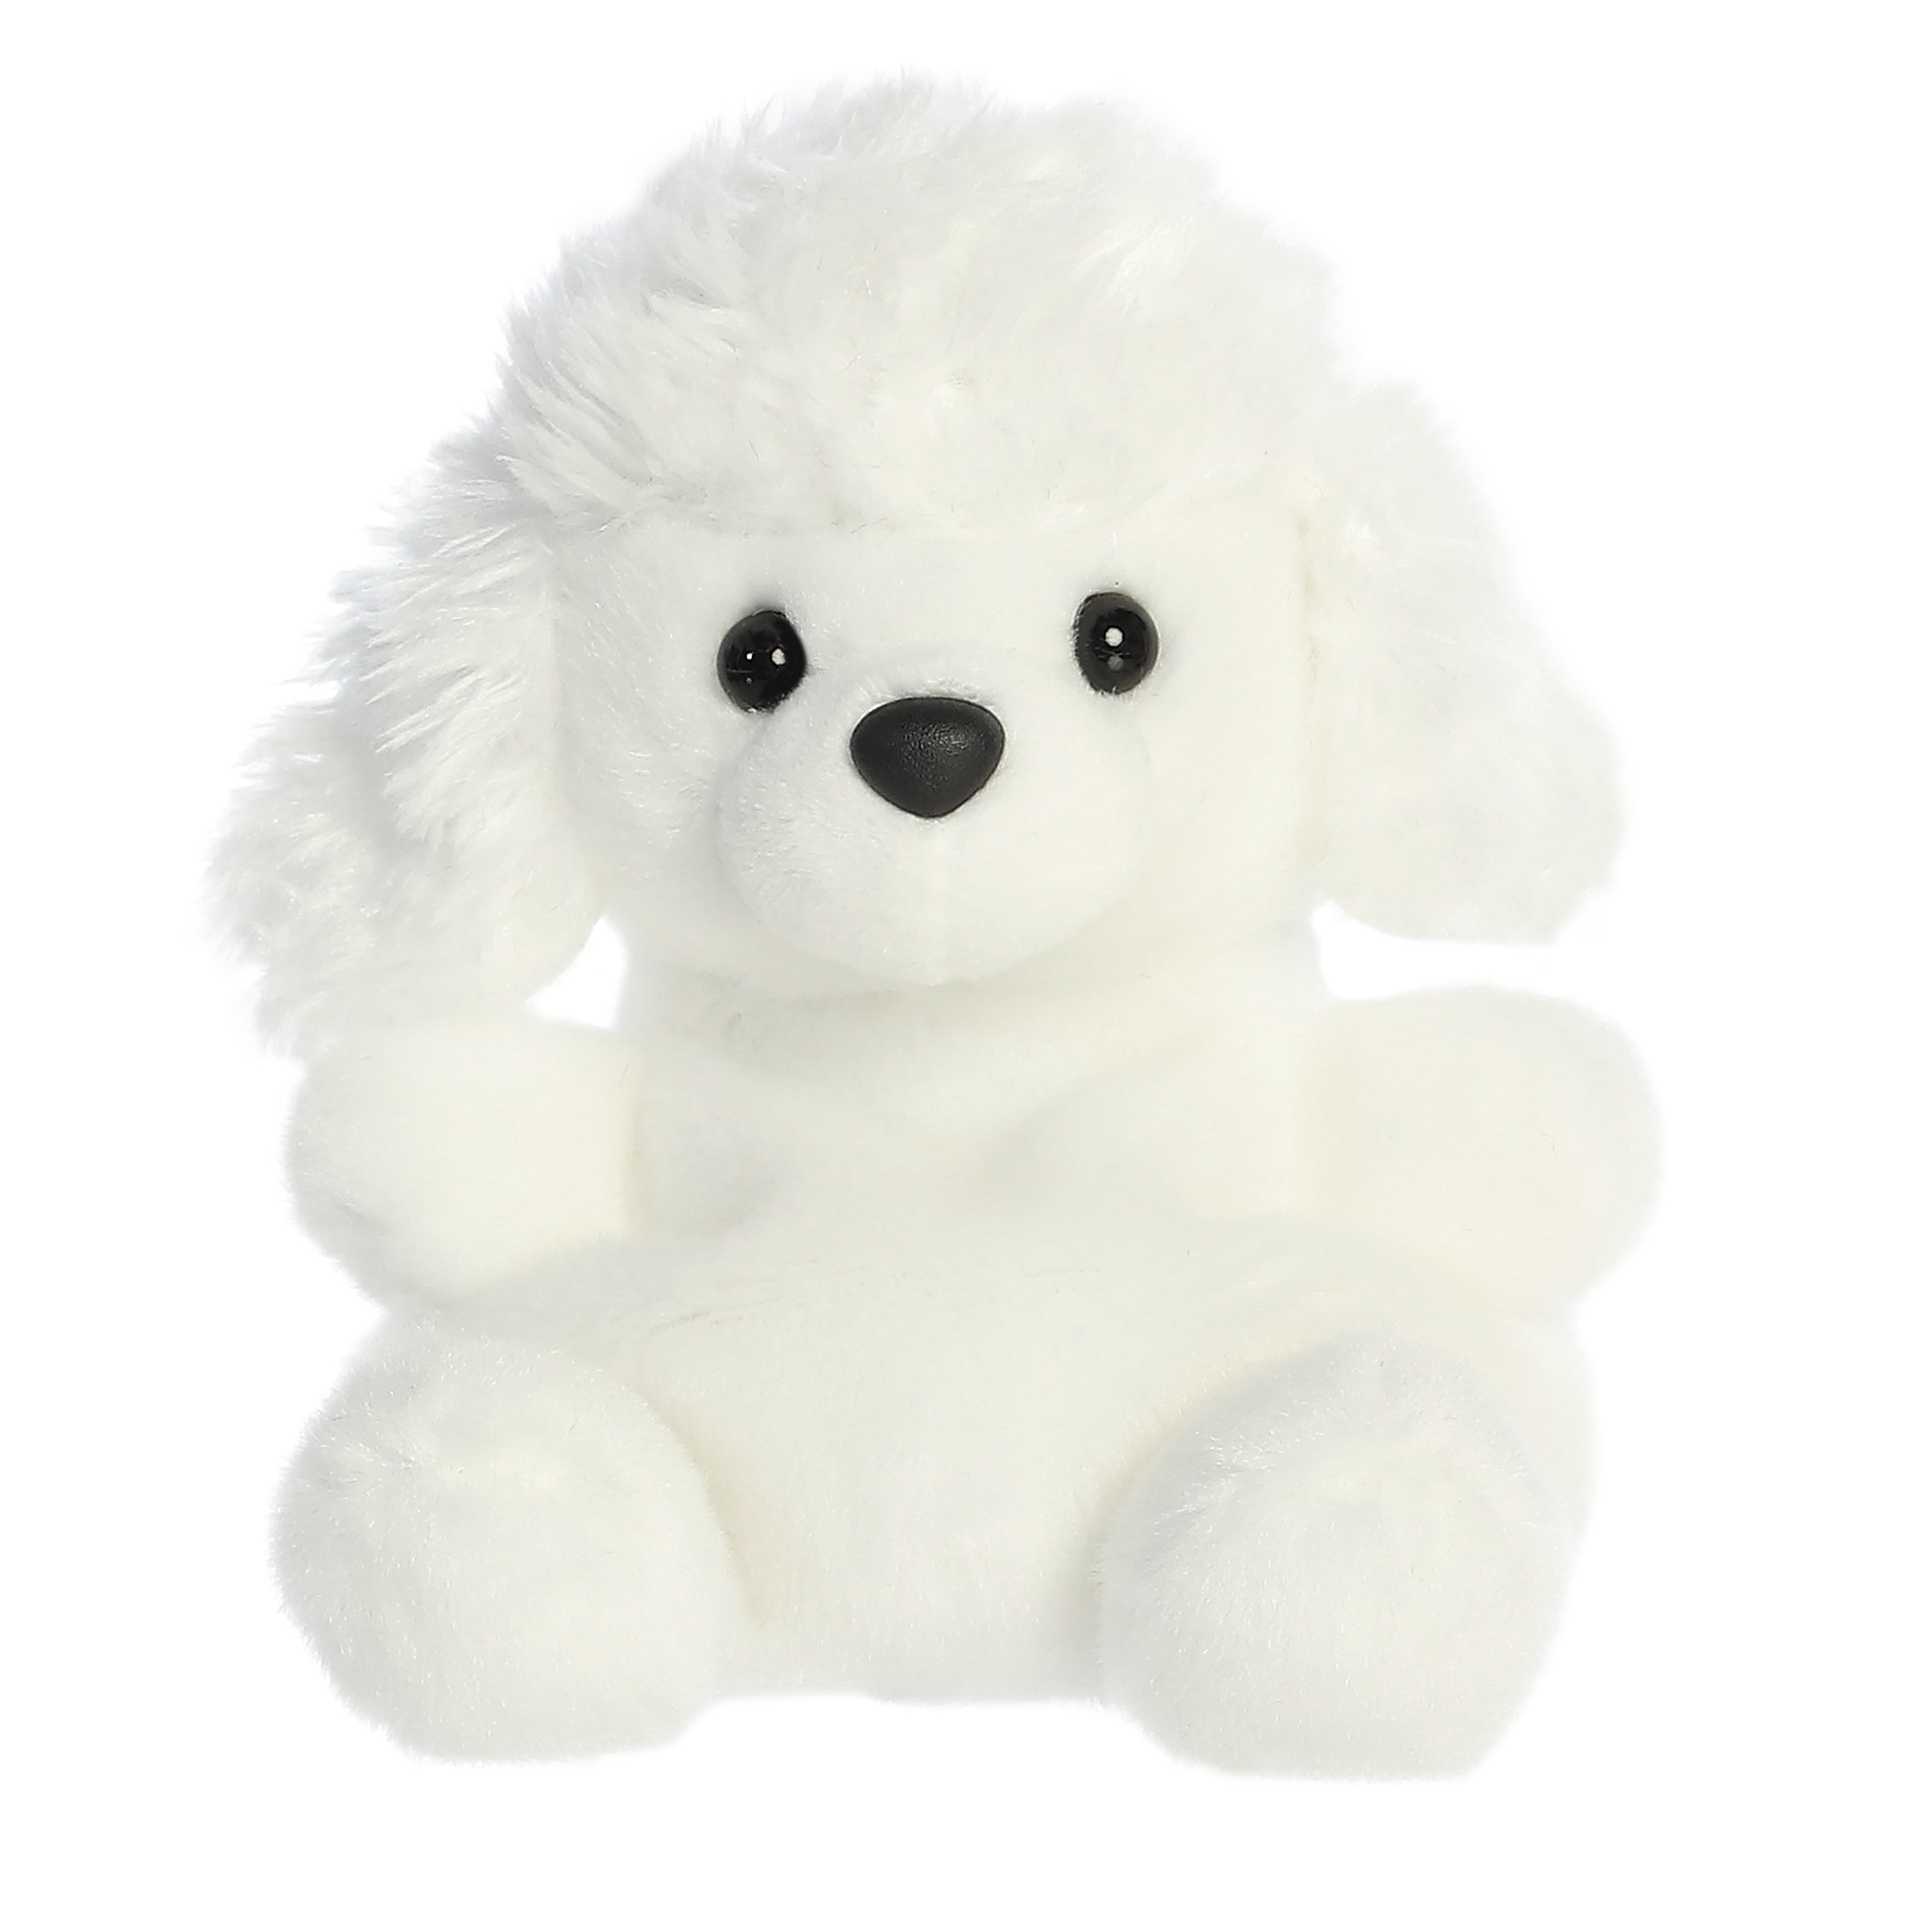 Lulu Poodle plush from Palm Pals, flaunting snow-white curls and black eyes, merges elegance with playfulness.